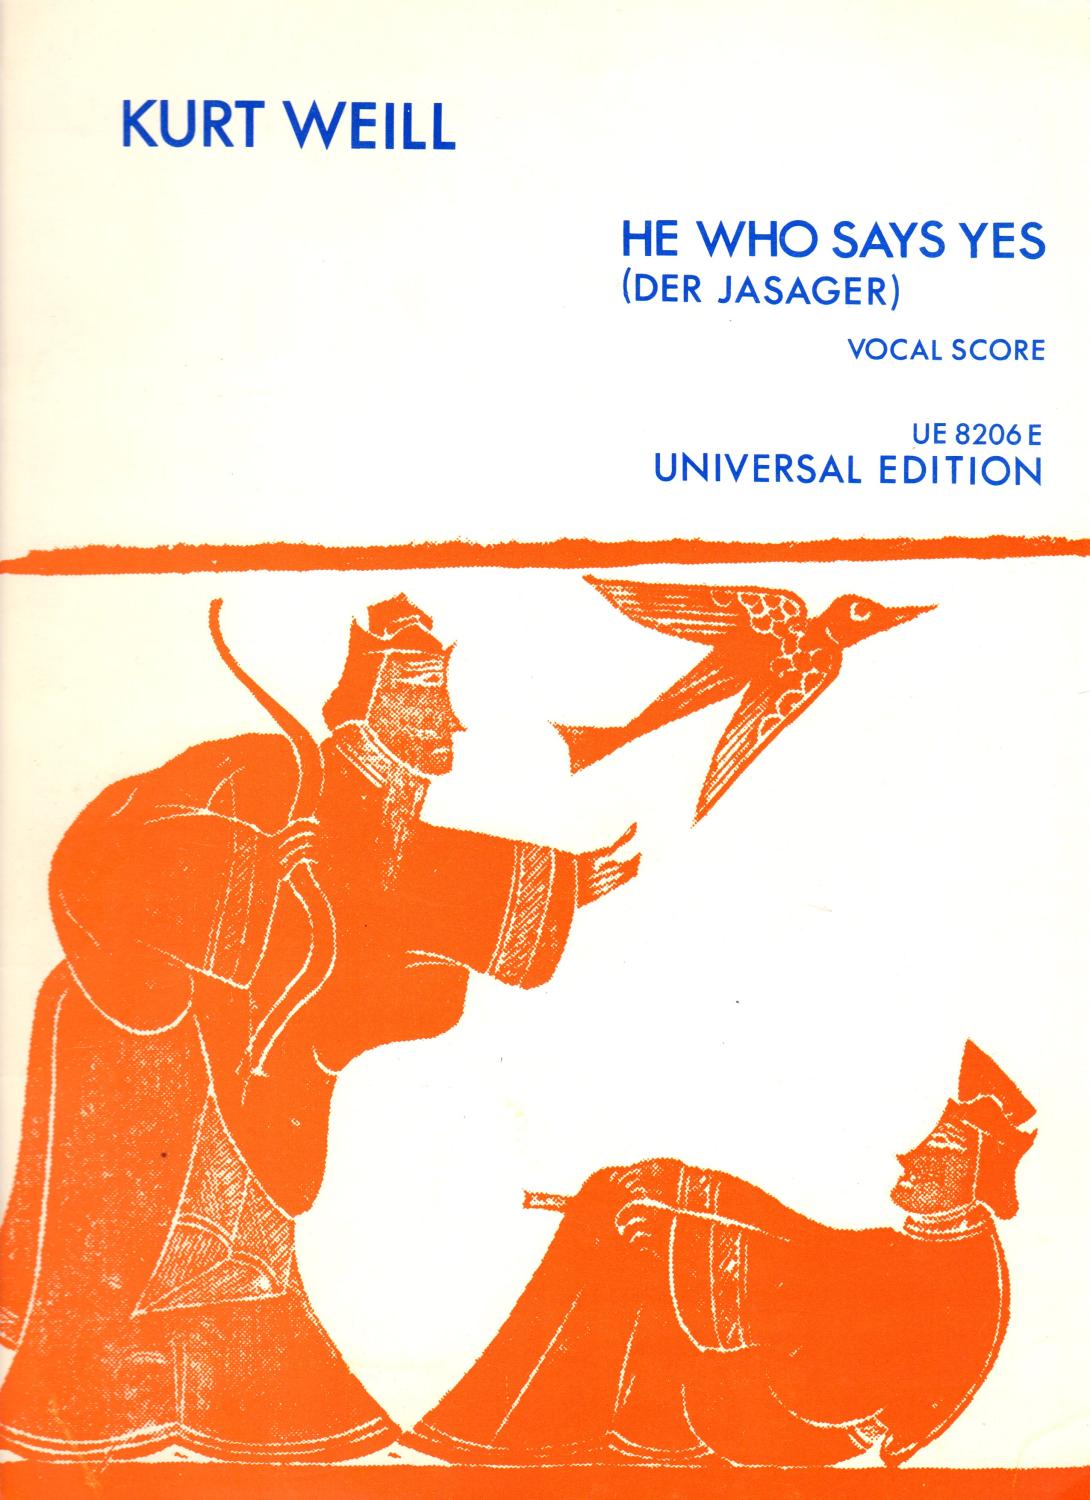 He Who Says Yes (Des Jasager): School Opera in Two Acts - Weill, Kurt (composer), Bert Brecht (libretto), and J. M. Potts (translation)